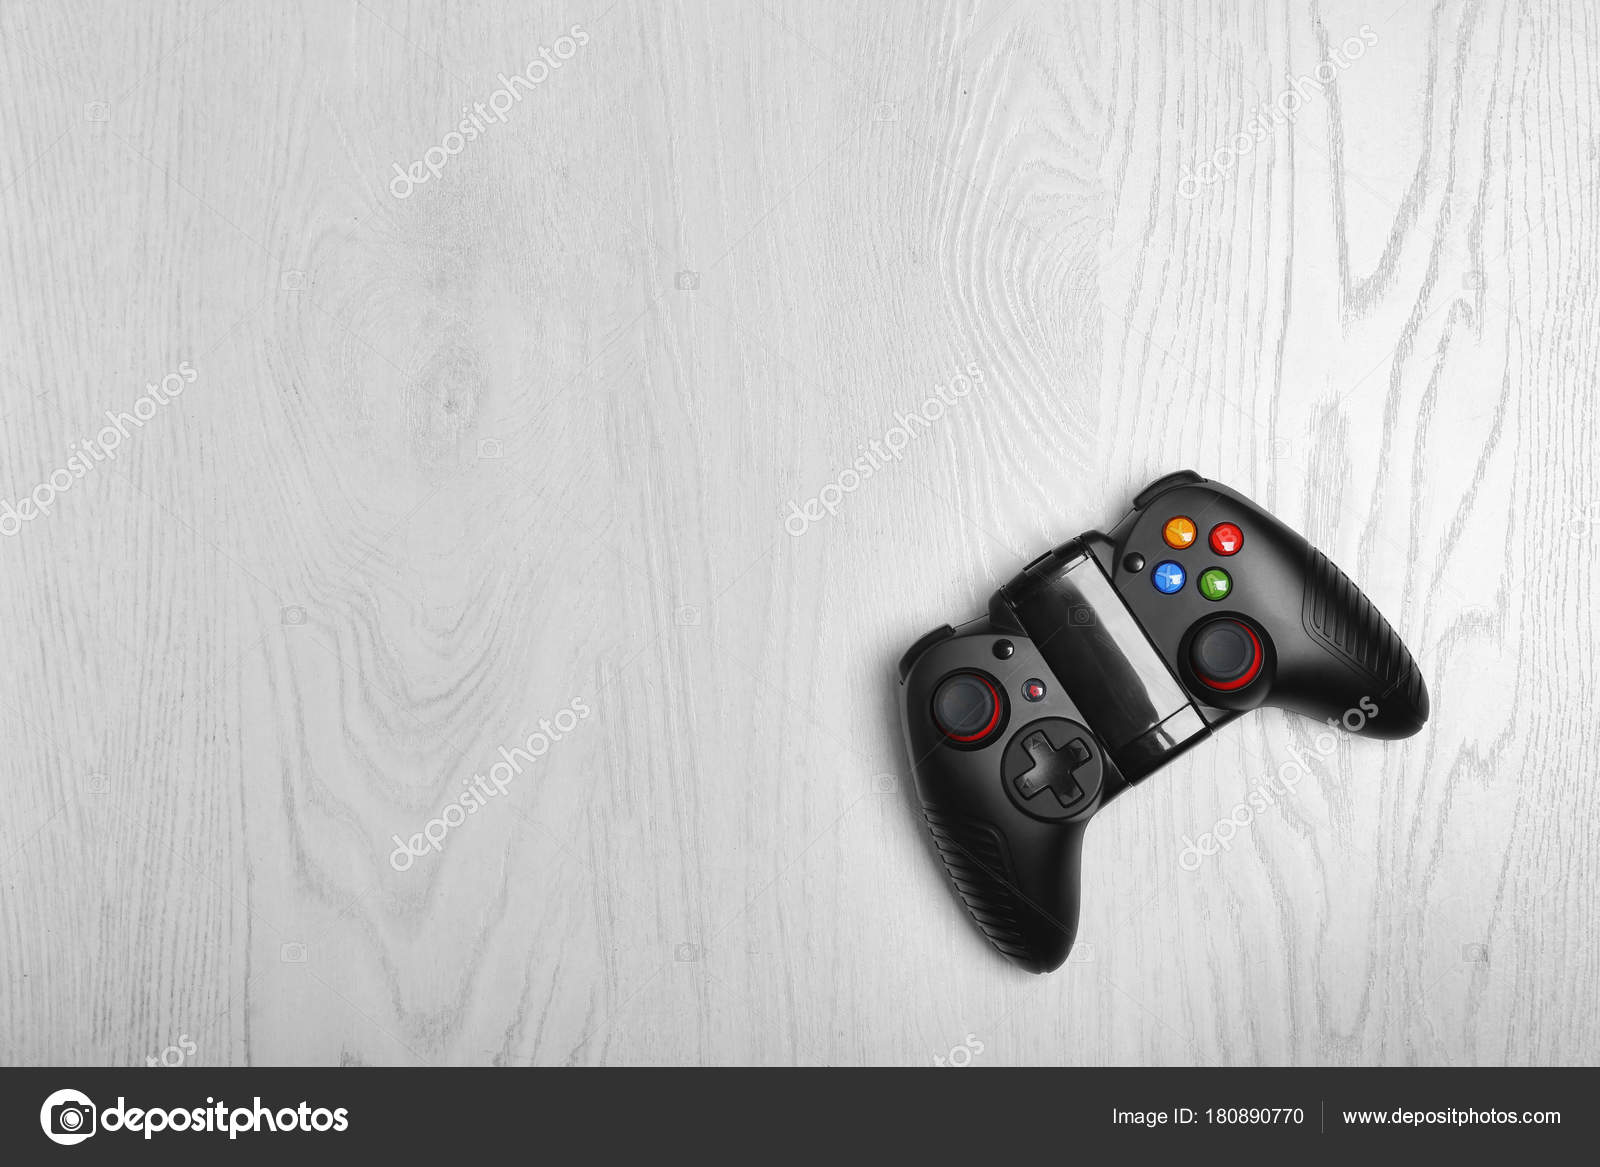 Video Game Controller Light Background Stock Photo by ©belchonock 180890770